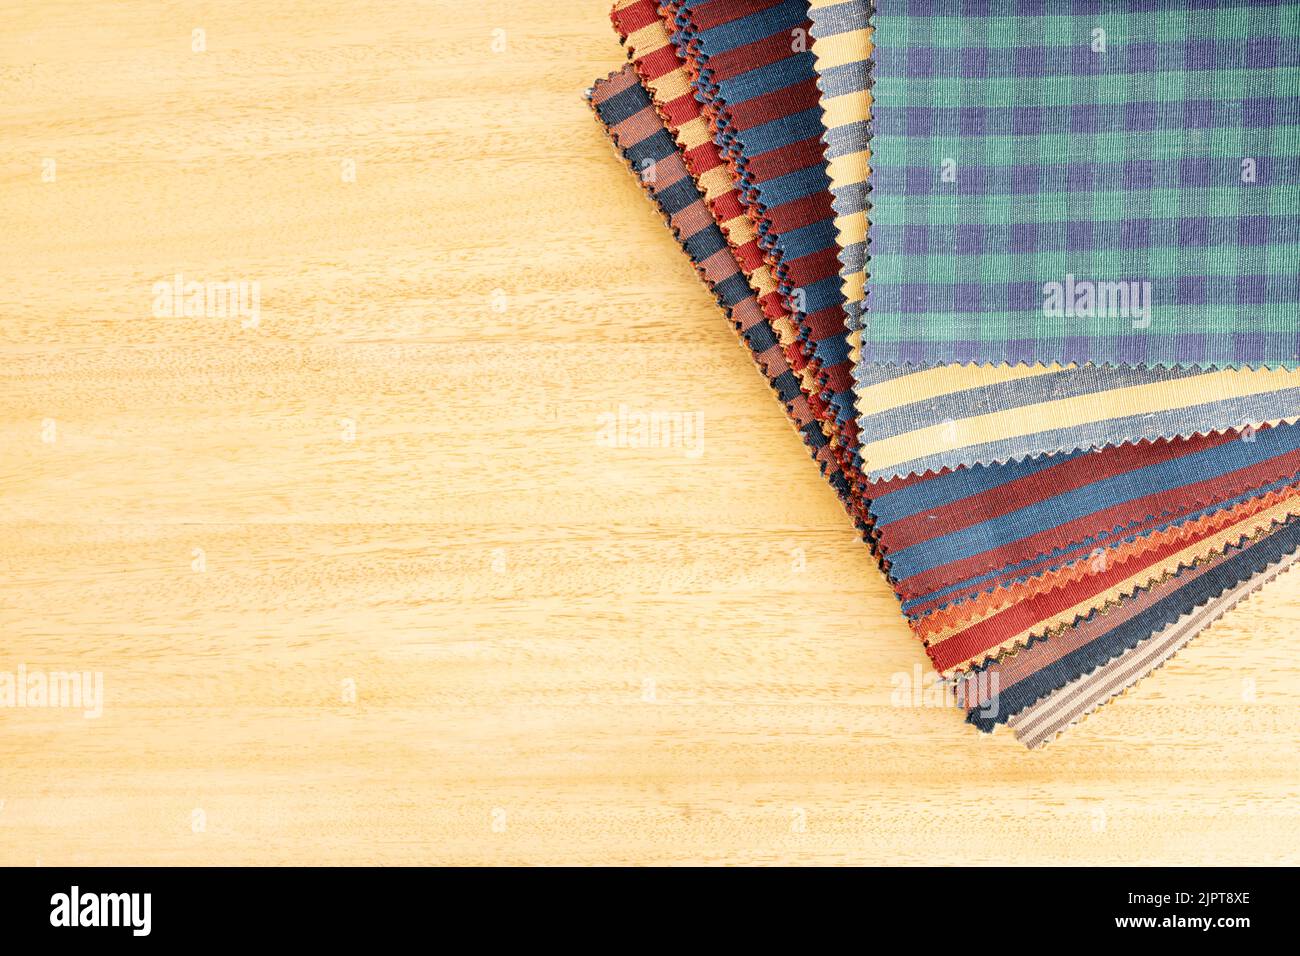 Fabric textile catalog on wooden table. Fabric samples upholstery and decoration. Copy space Stock Photo